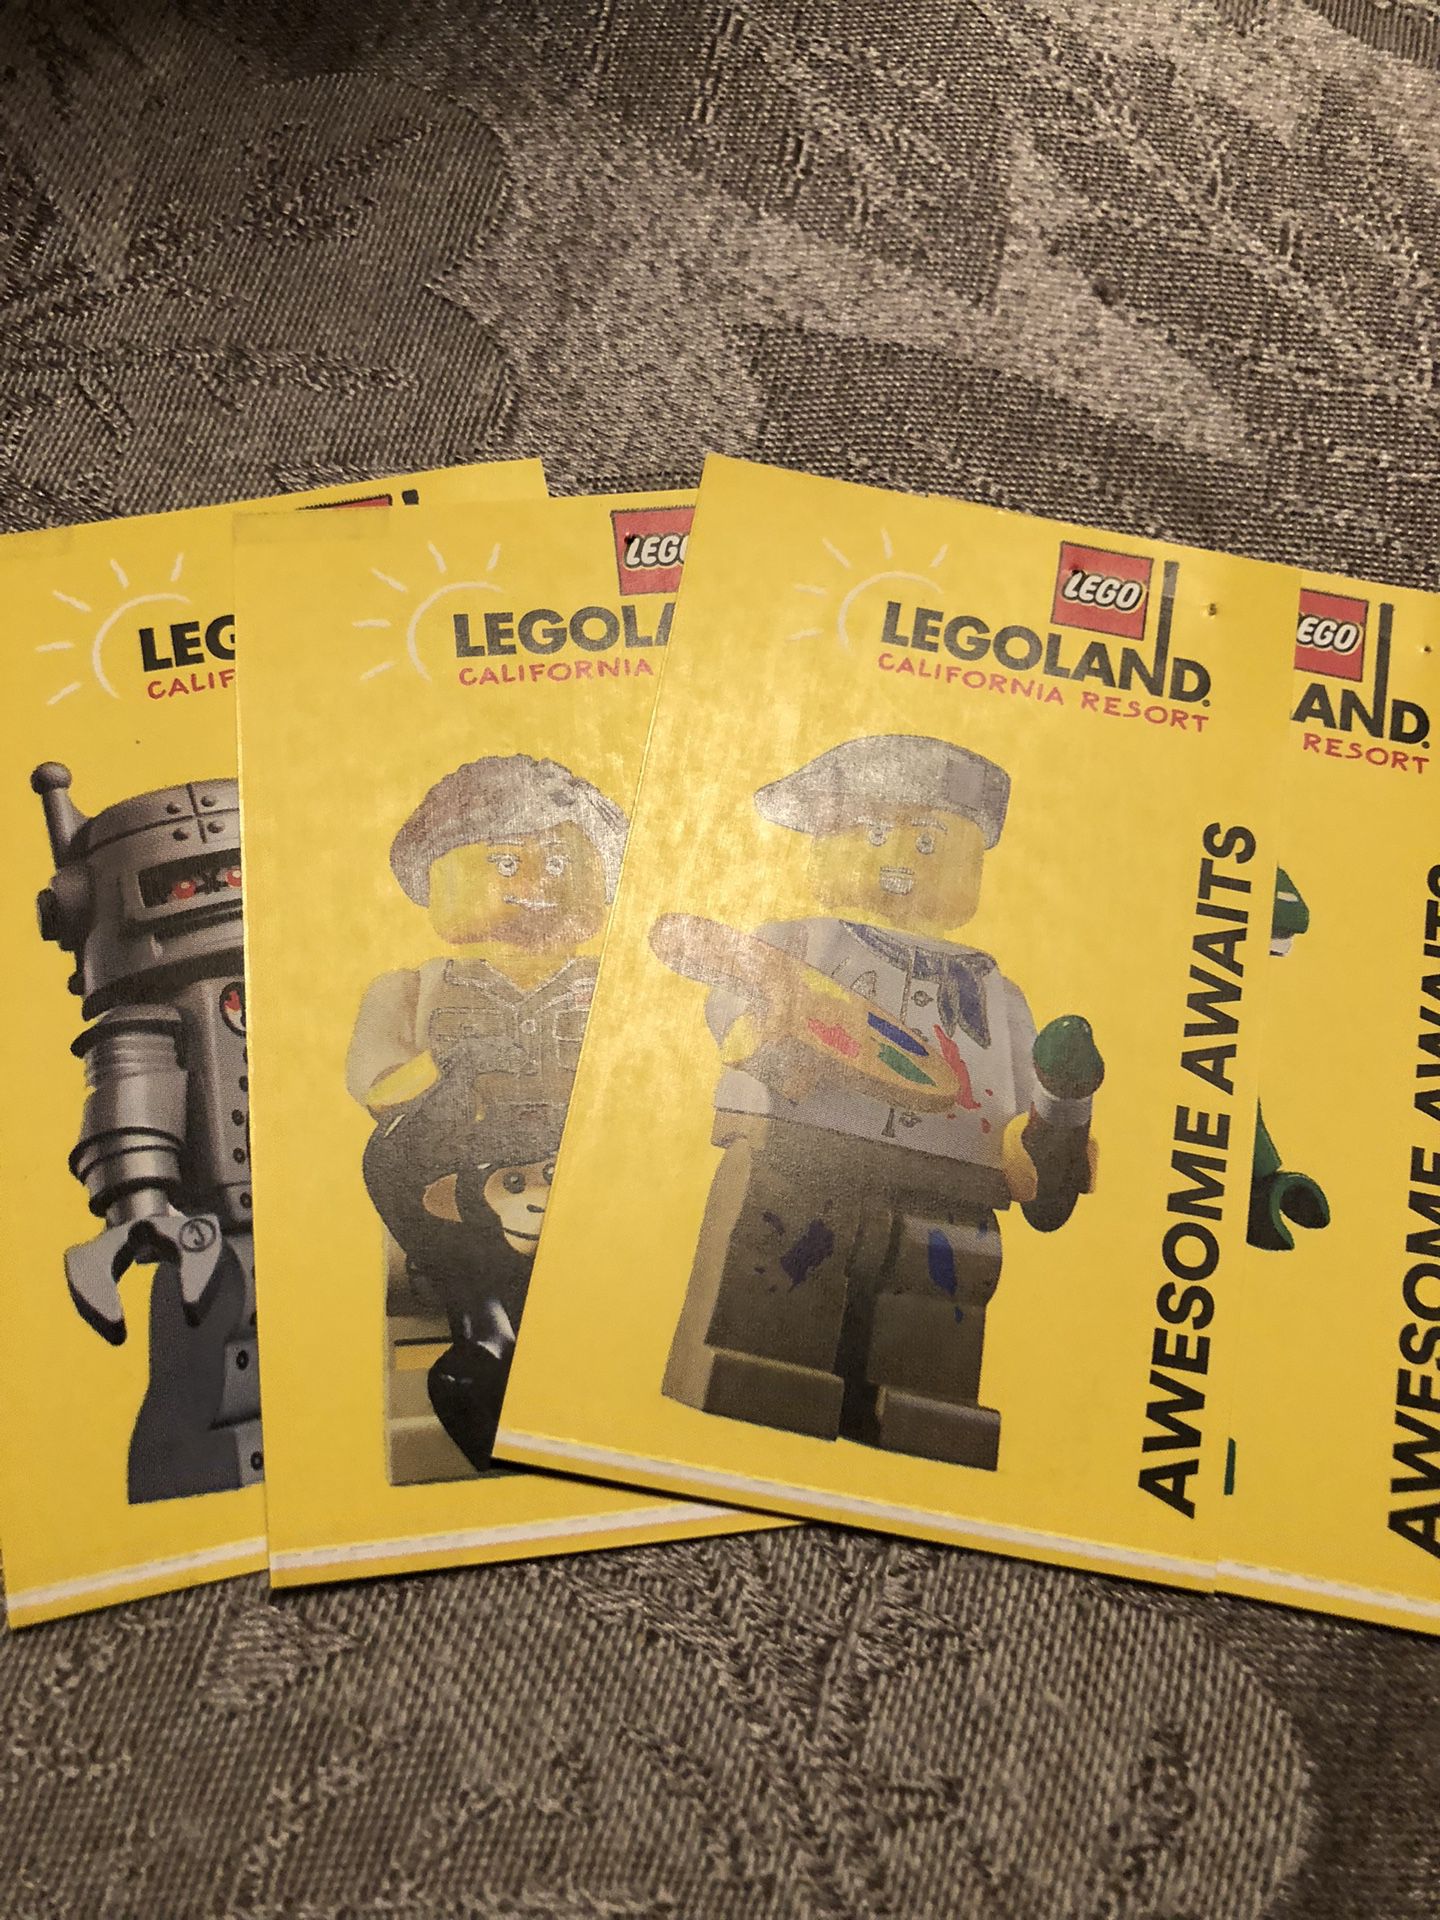 LEGO LAND 🎄(4) TICKETS 🎟️ 🎟️🎟️🎟️ $360 FOR ALL (4) 